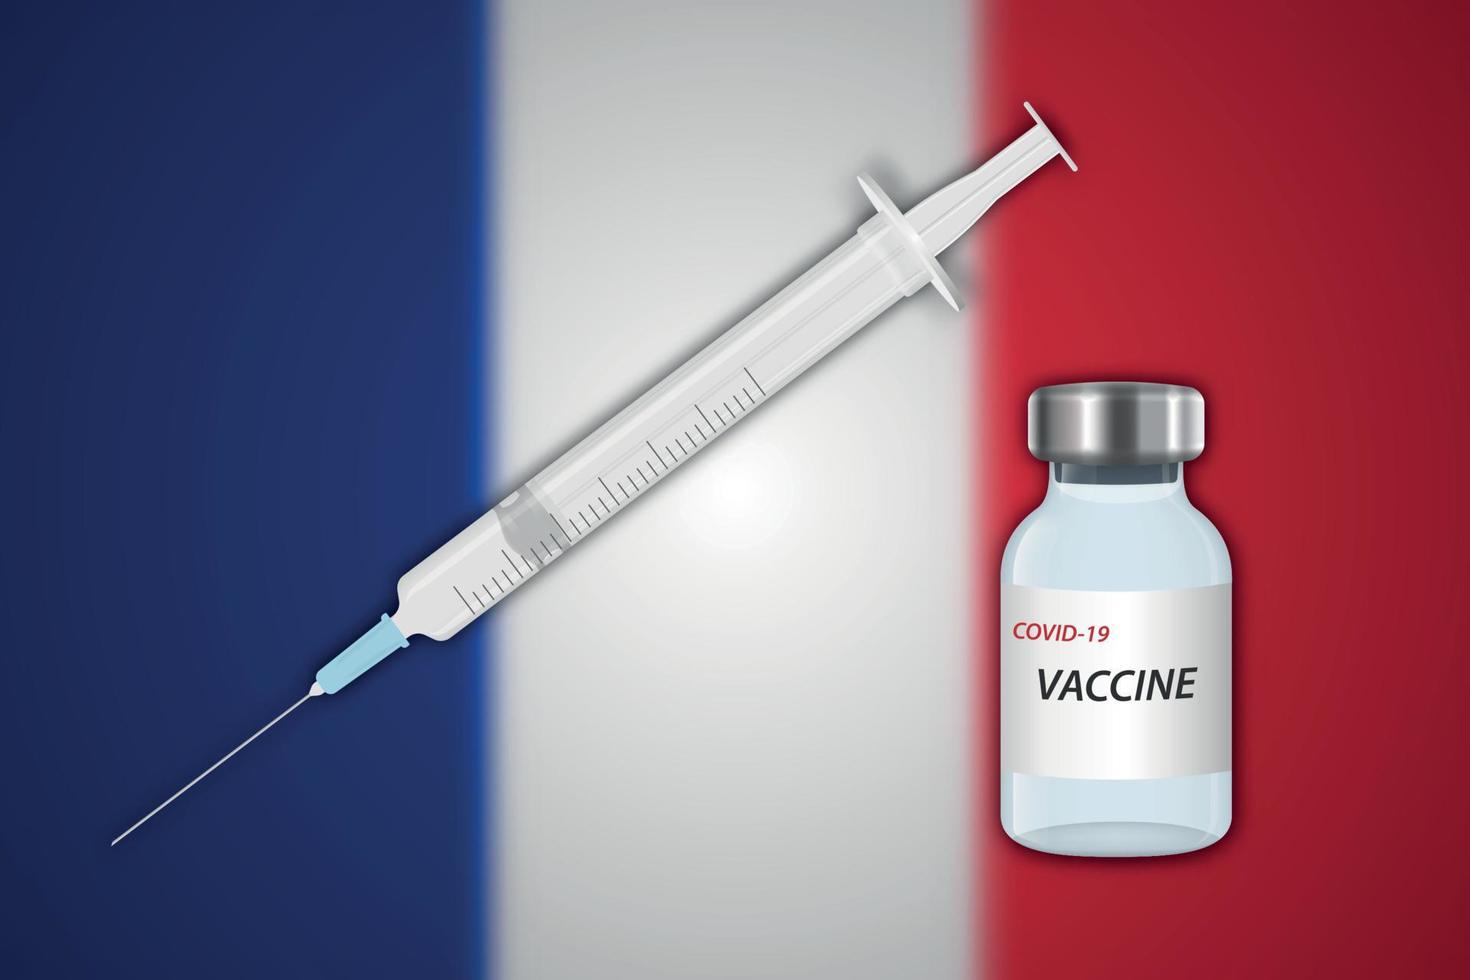 Syringe and vaccine vial on blur background with France flag vector